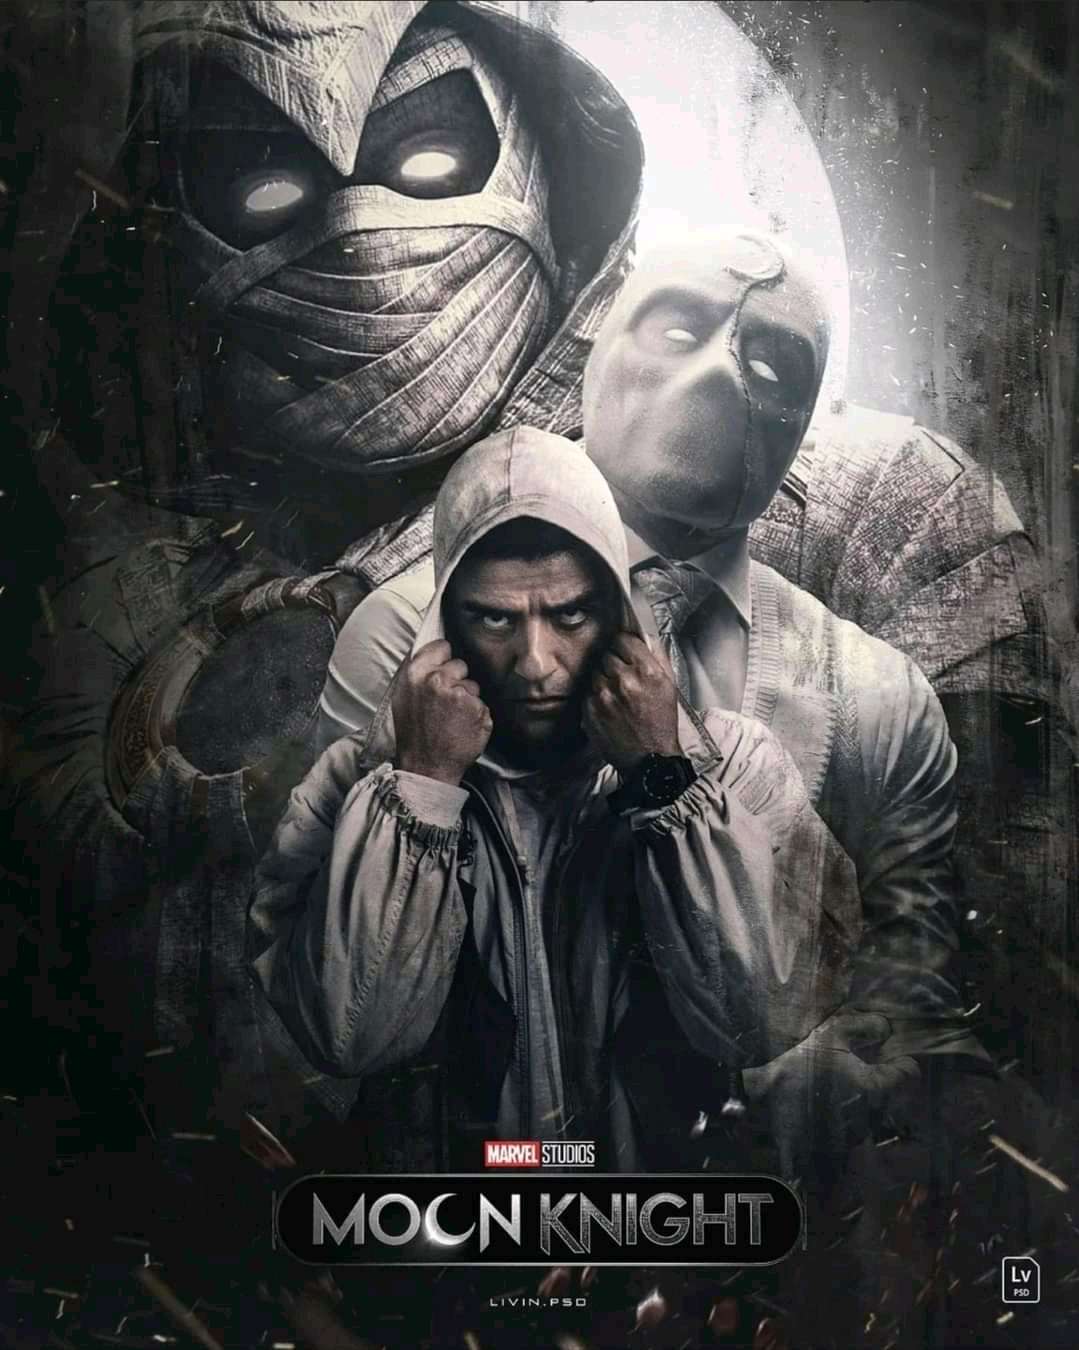 WHY MOON KNIGHT SEASON 1 IS WORTH WATCHING (REVIEW)